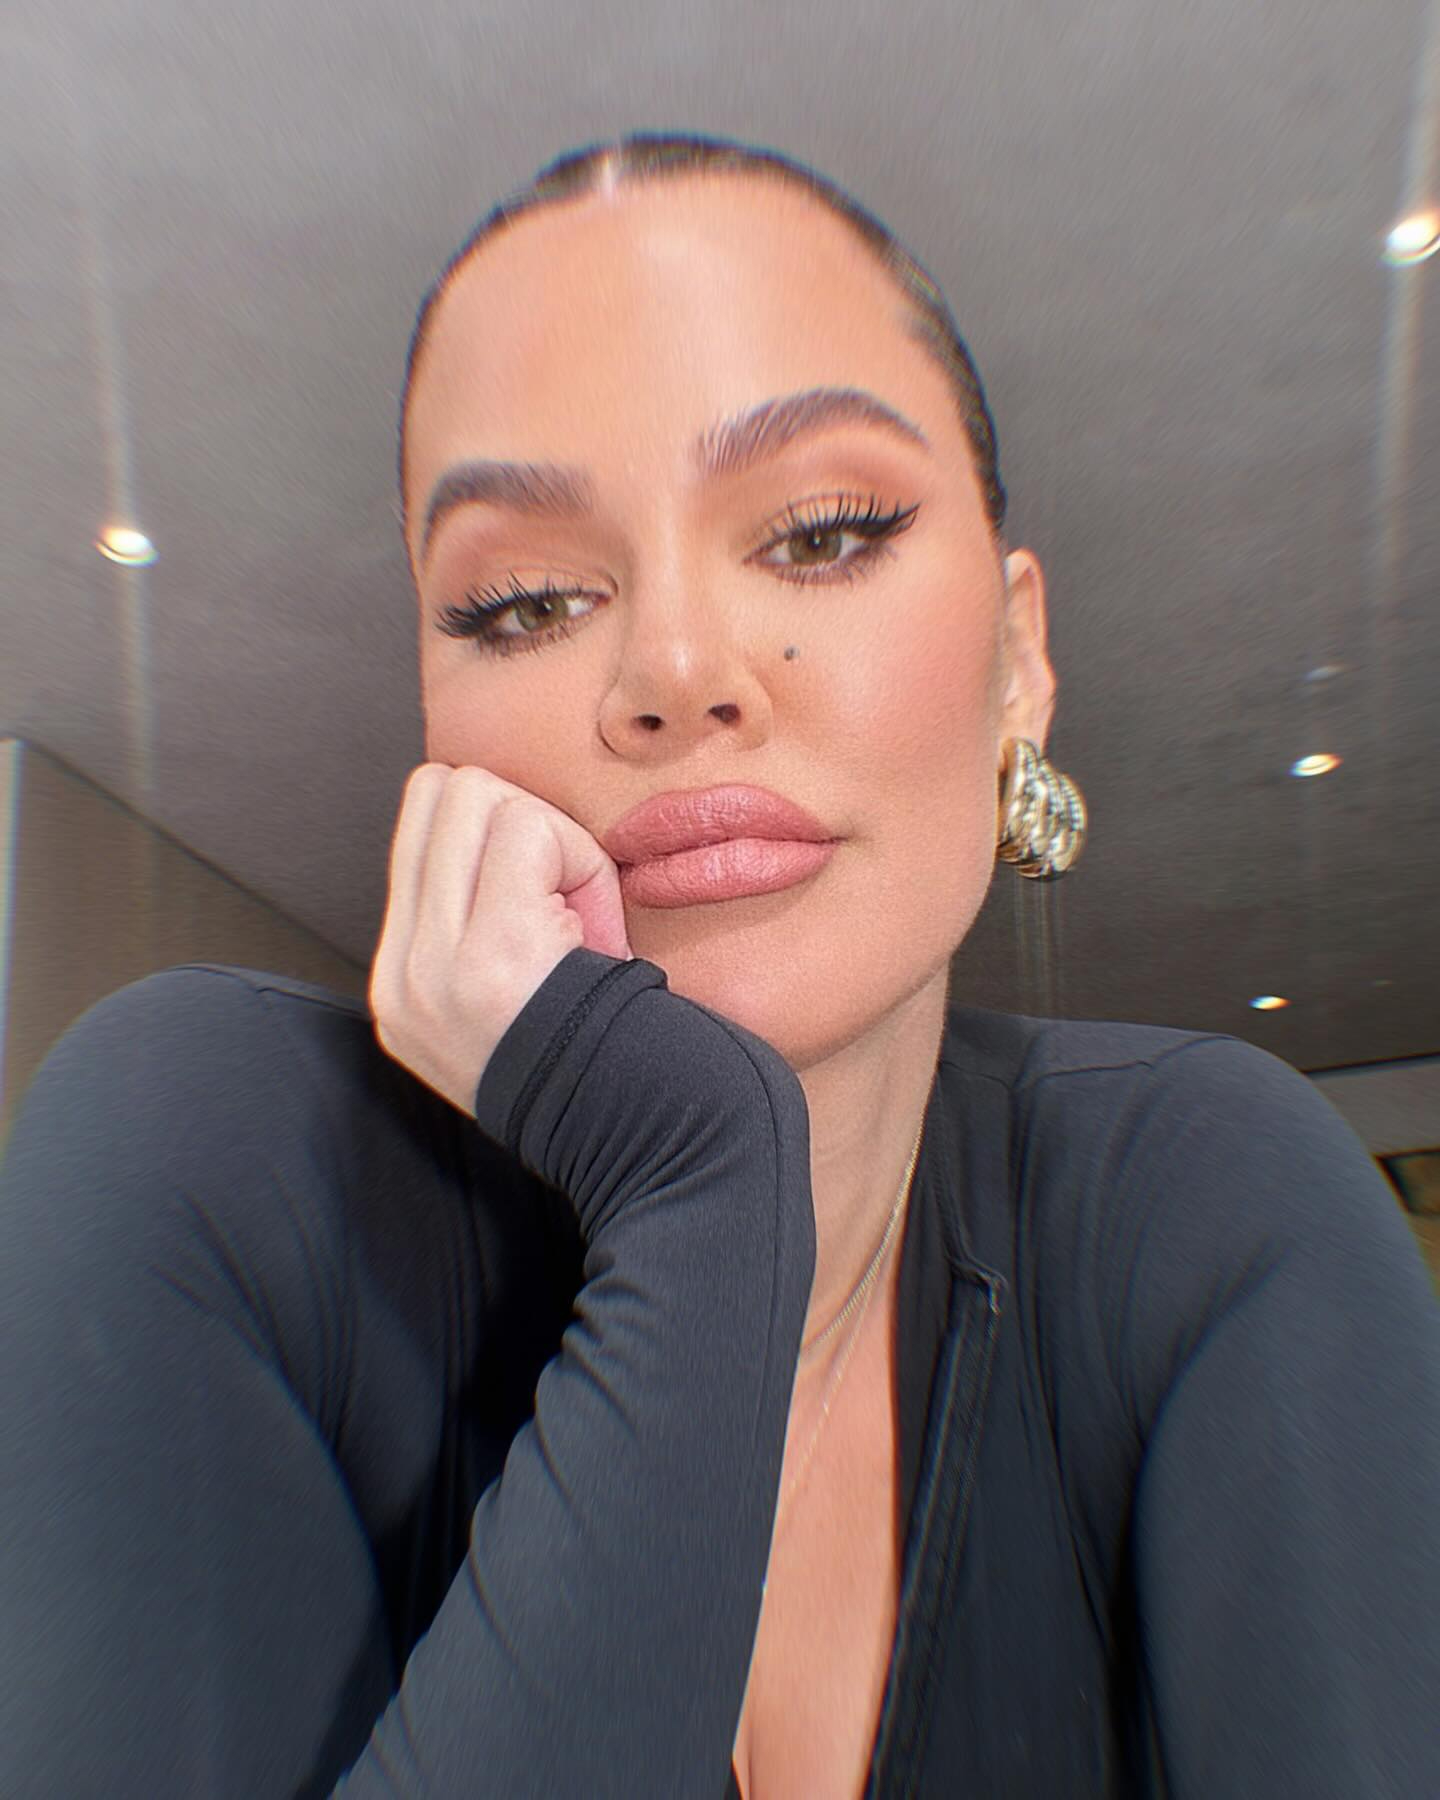 Khloe Kardashian showing off her pout for a selfie shared on Instagram